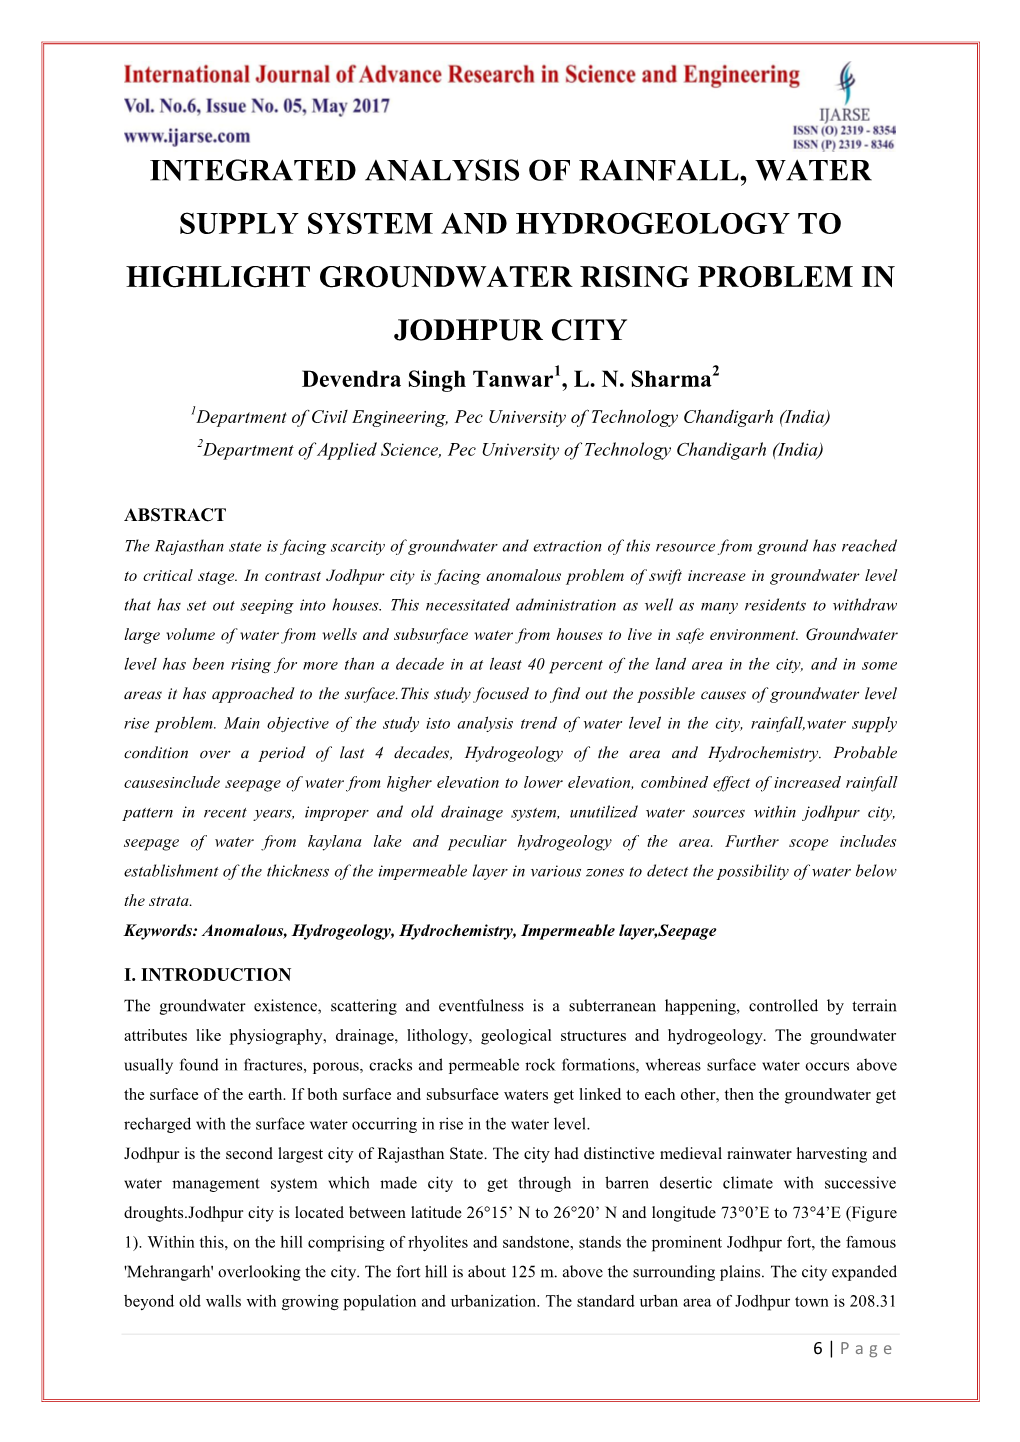 INTEGRATED ANALYSIS of RAINFALL, WATER SUPPLY SYSTEM and HYDROGEOLOGY to HIGHLIGHT GROUNDWATER RISING PROBLEM in JODHPUR CITY Devendra Singh Tanwar1, L